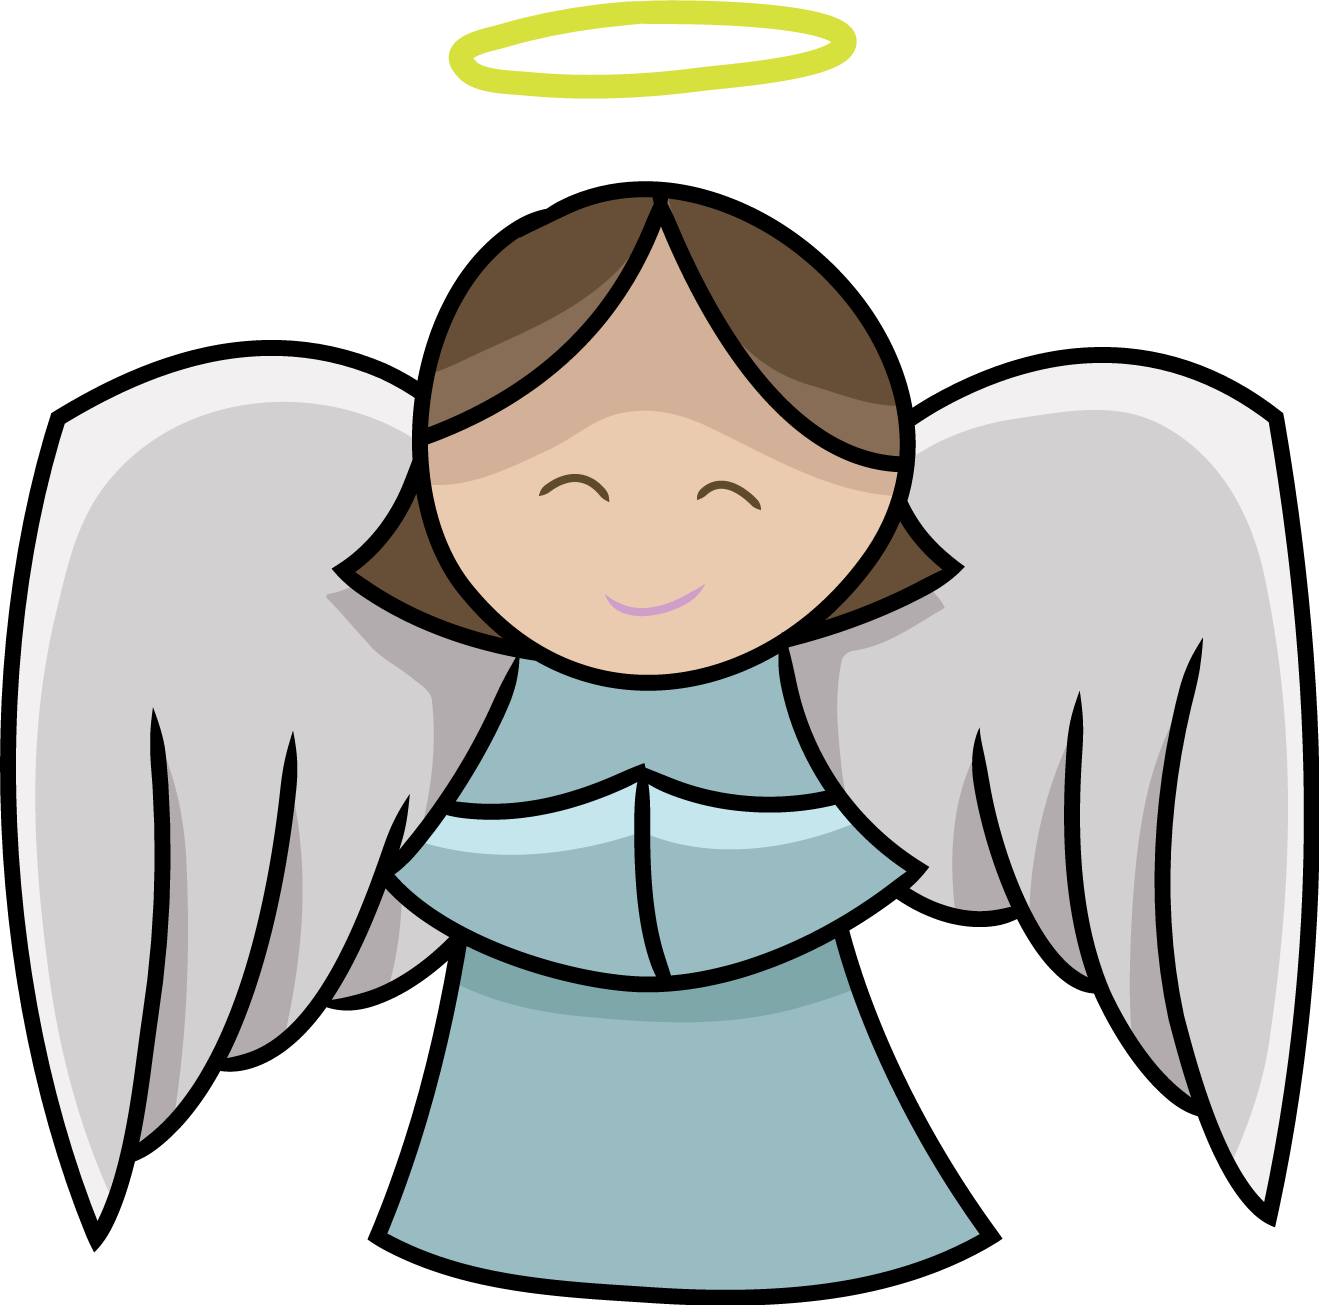 free clipart angels download - photo #4